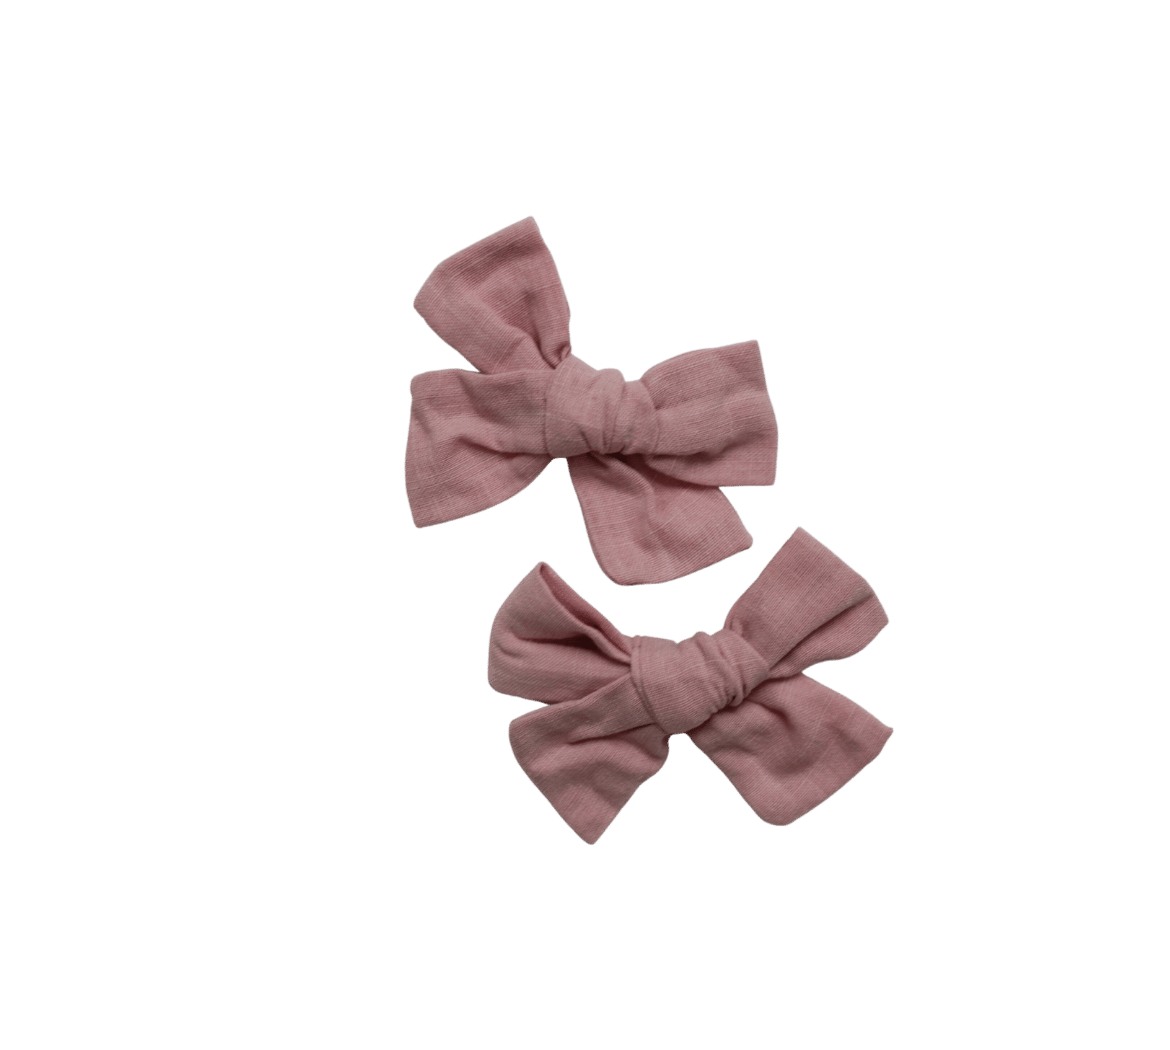 Clip Bow in Ballet Pink